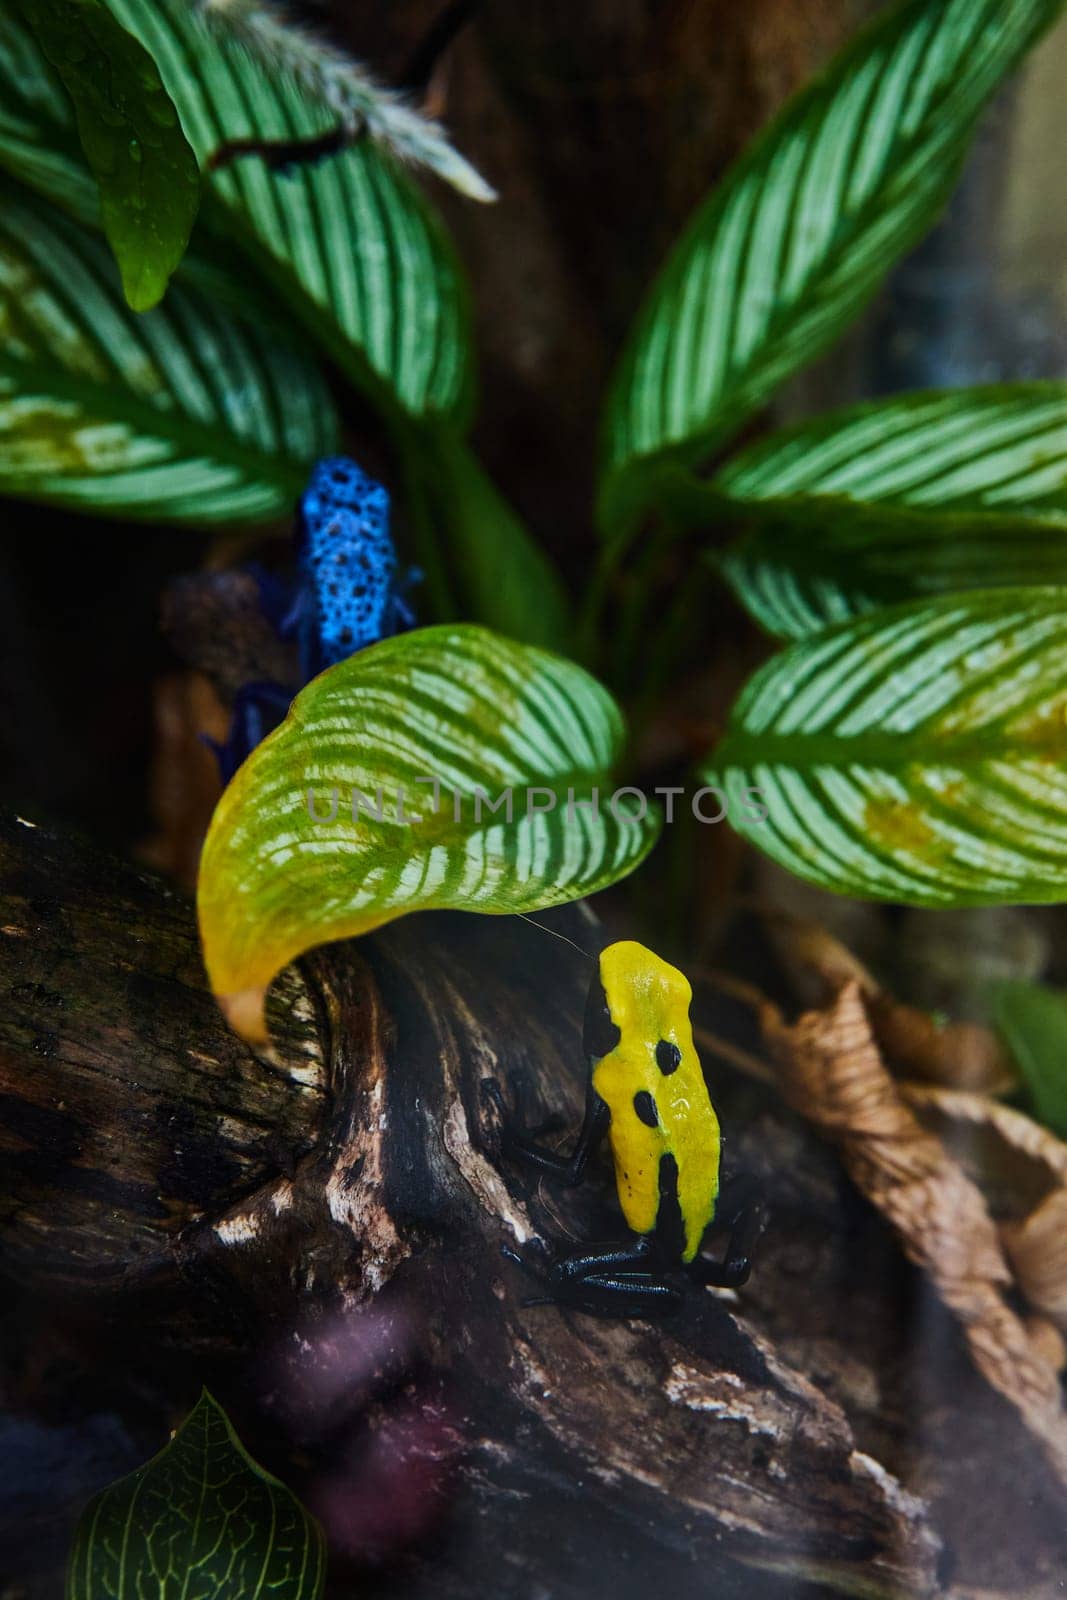 Vibrant Poison Dart Frogs in Lush Foliage, Eye-Level View by njproductions